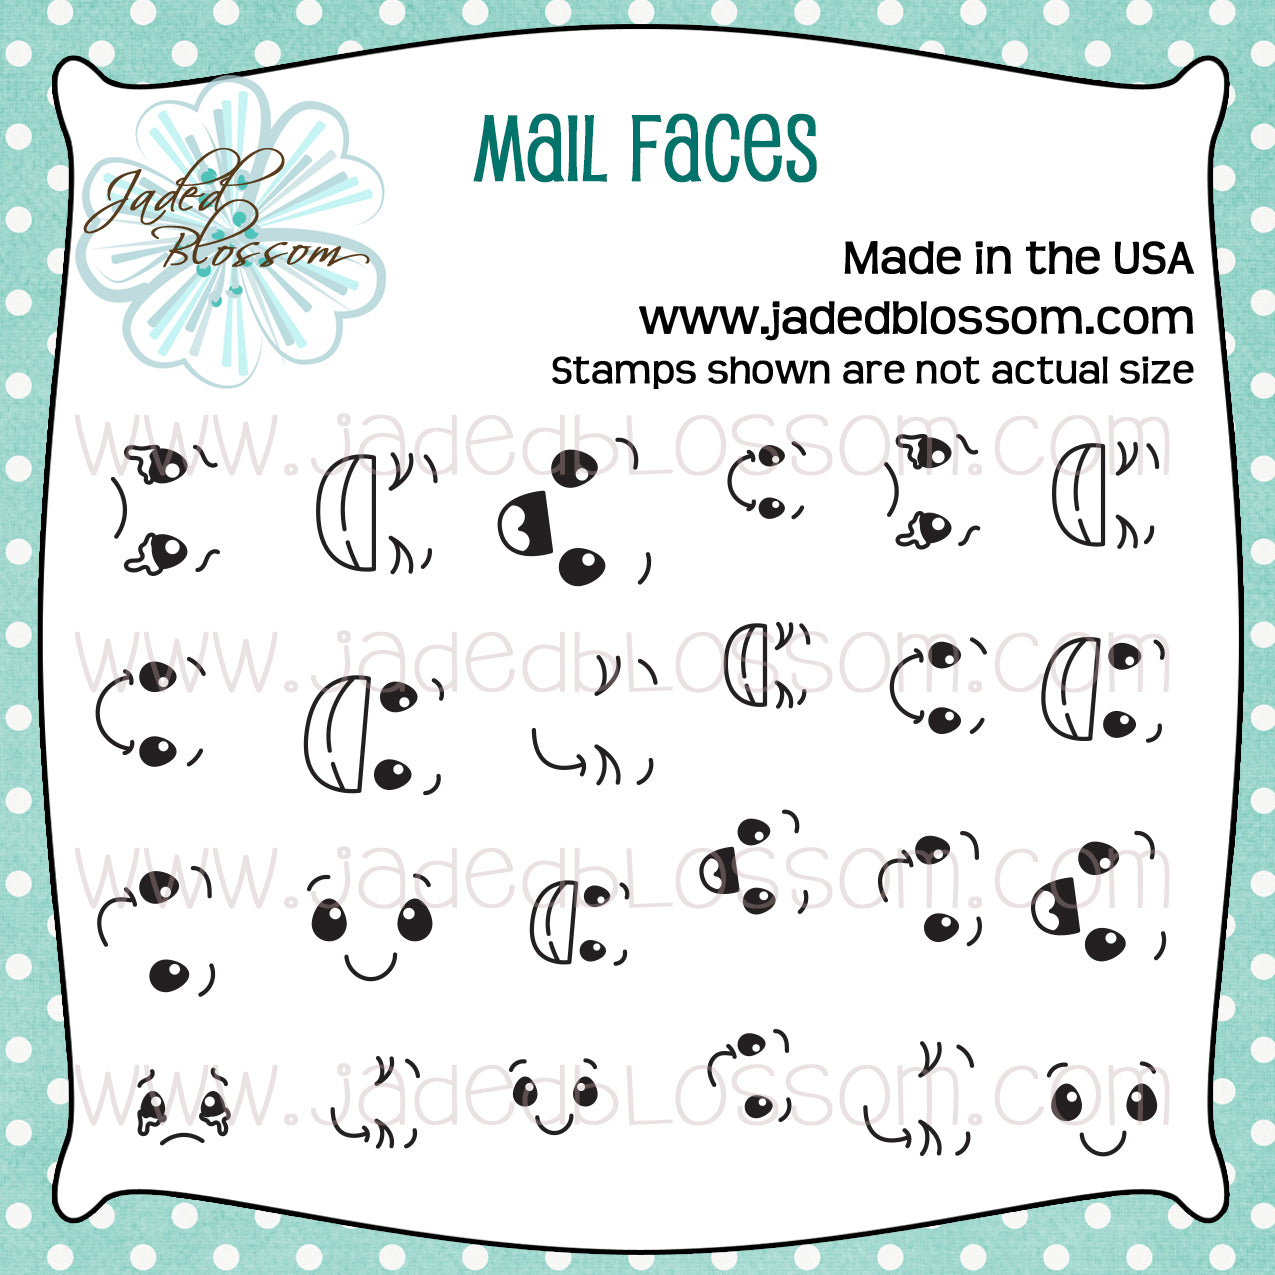 Mail Faces